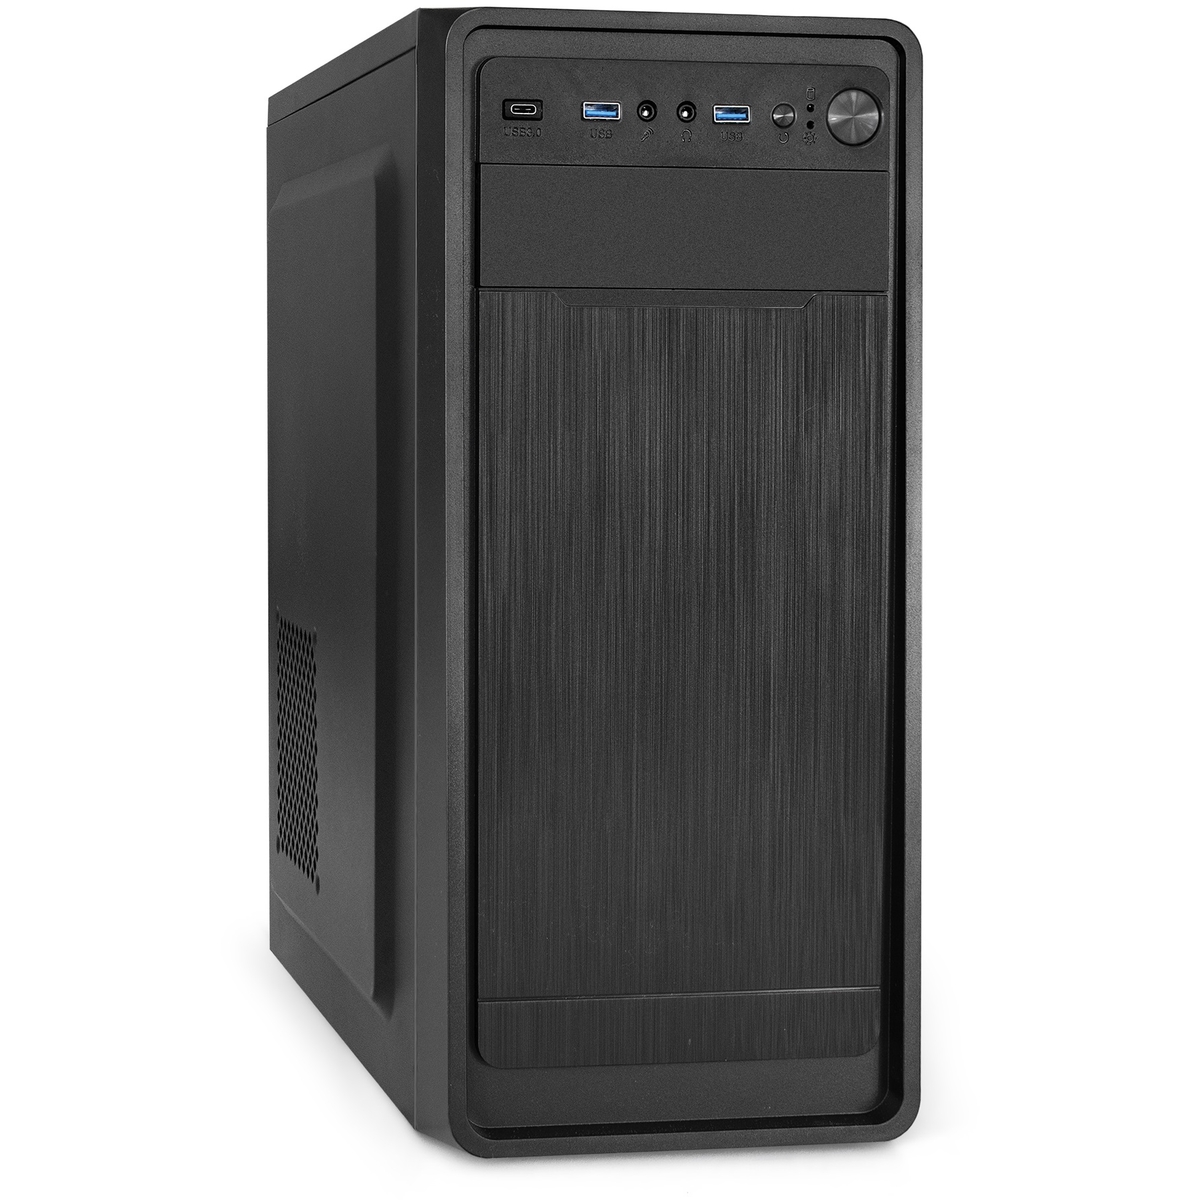 Miditower ExeGate XP-332UC